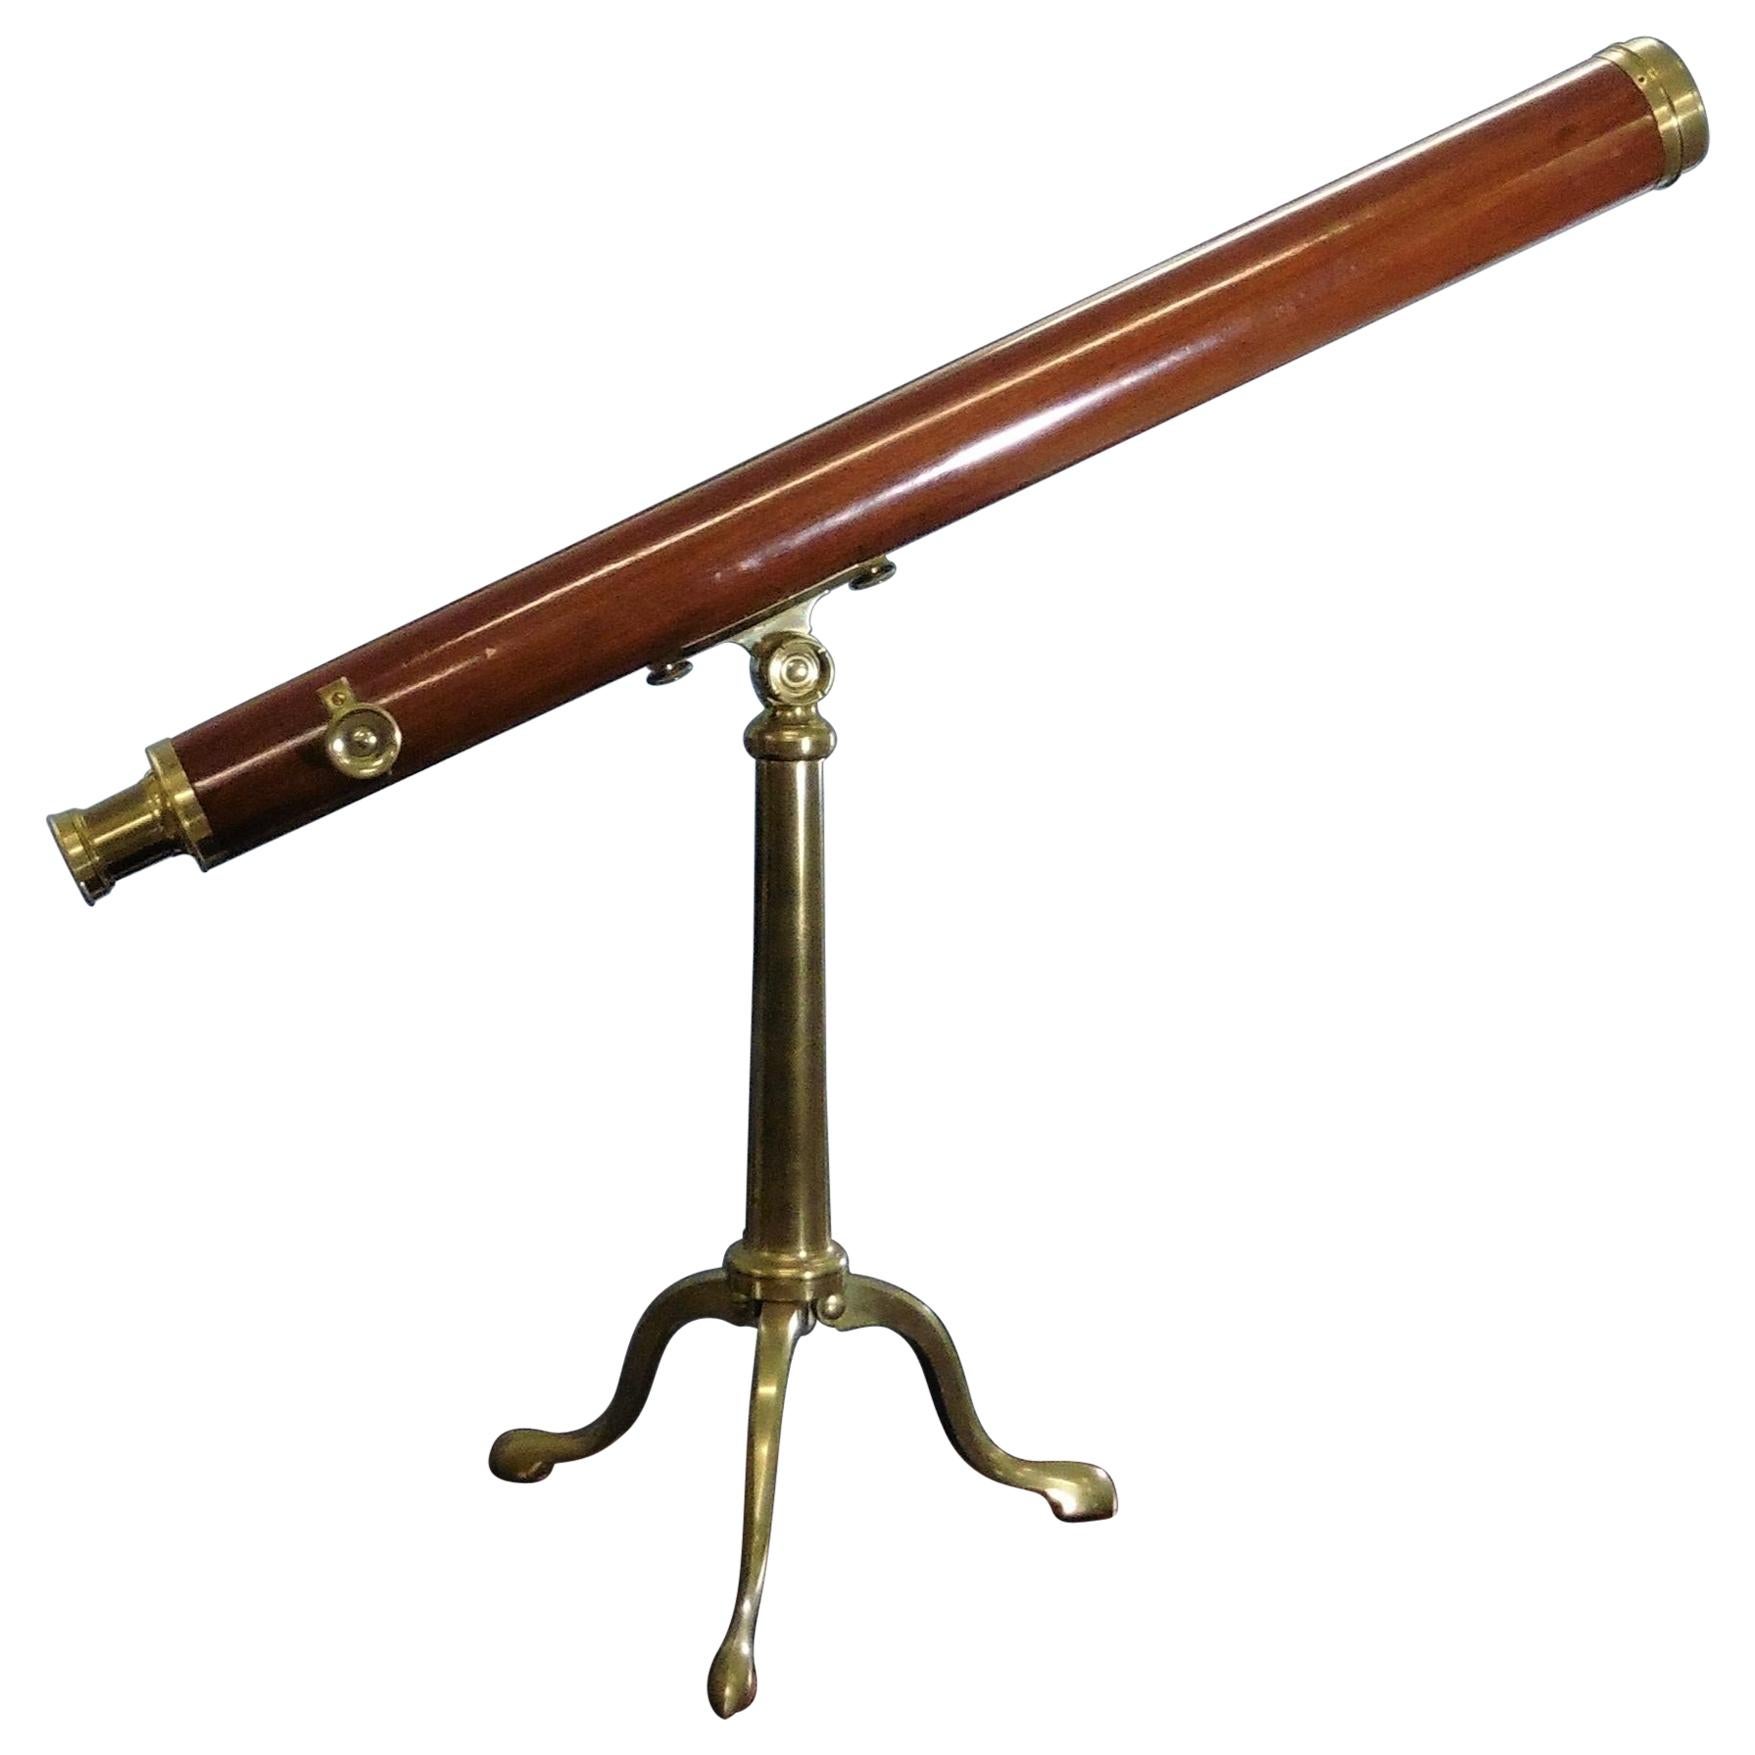 Refracting Mahogany Telescope Signed Watkins, Charing Cross For Sale